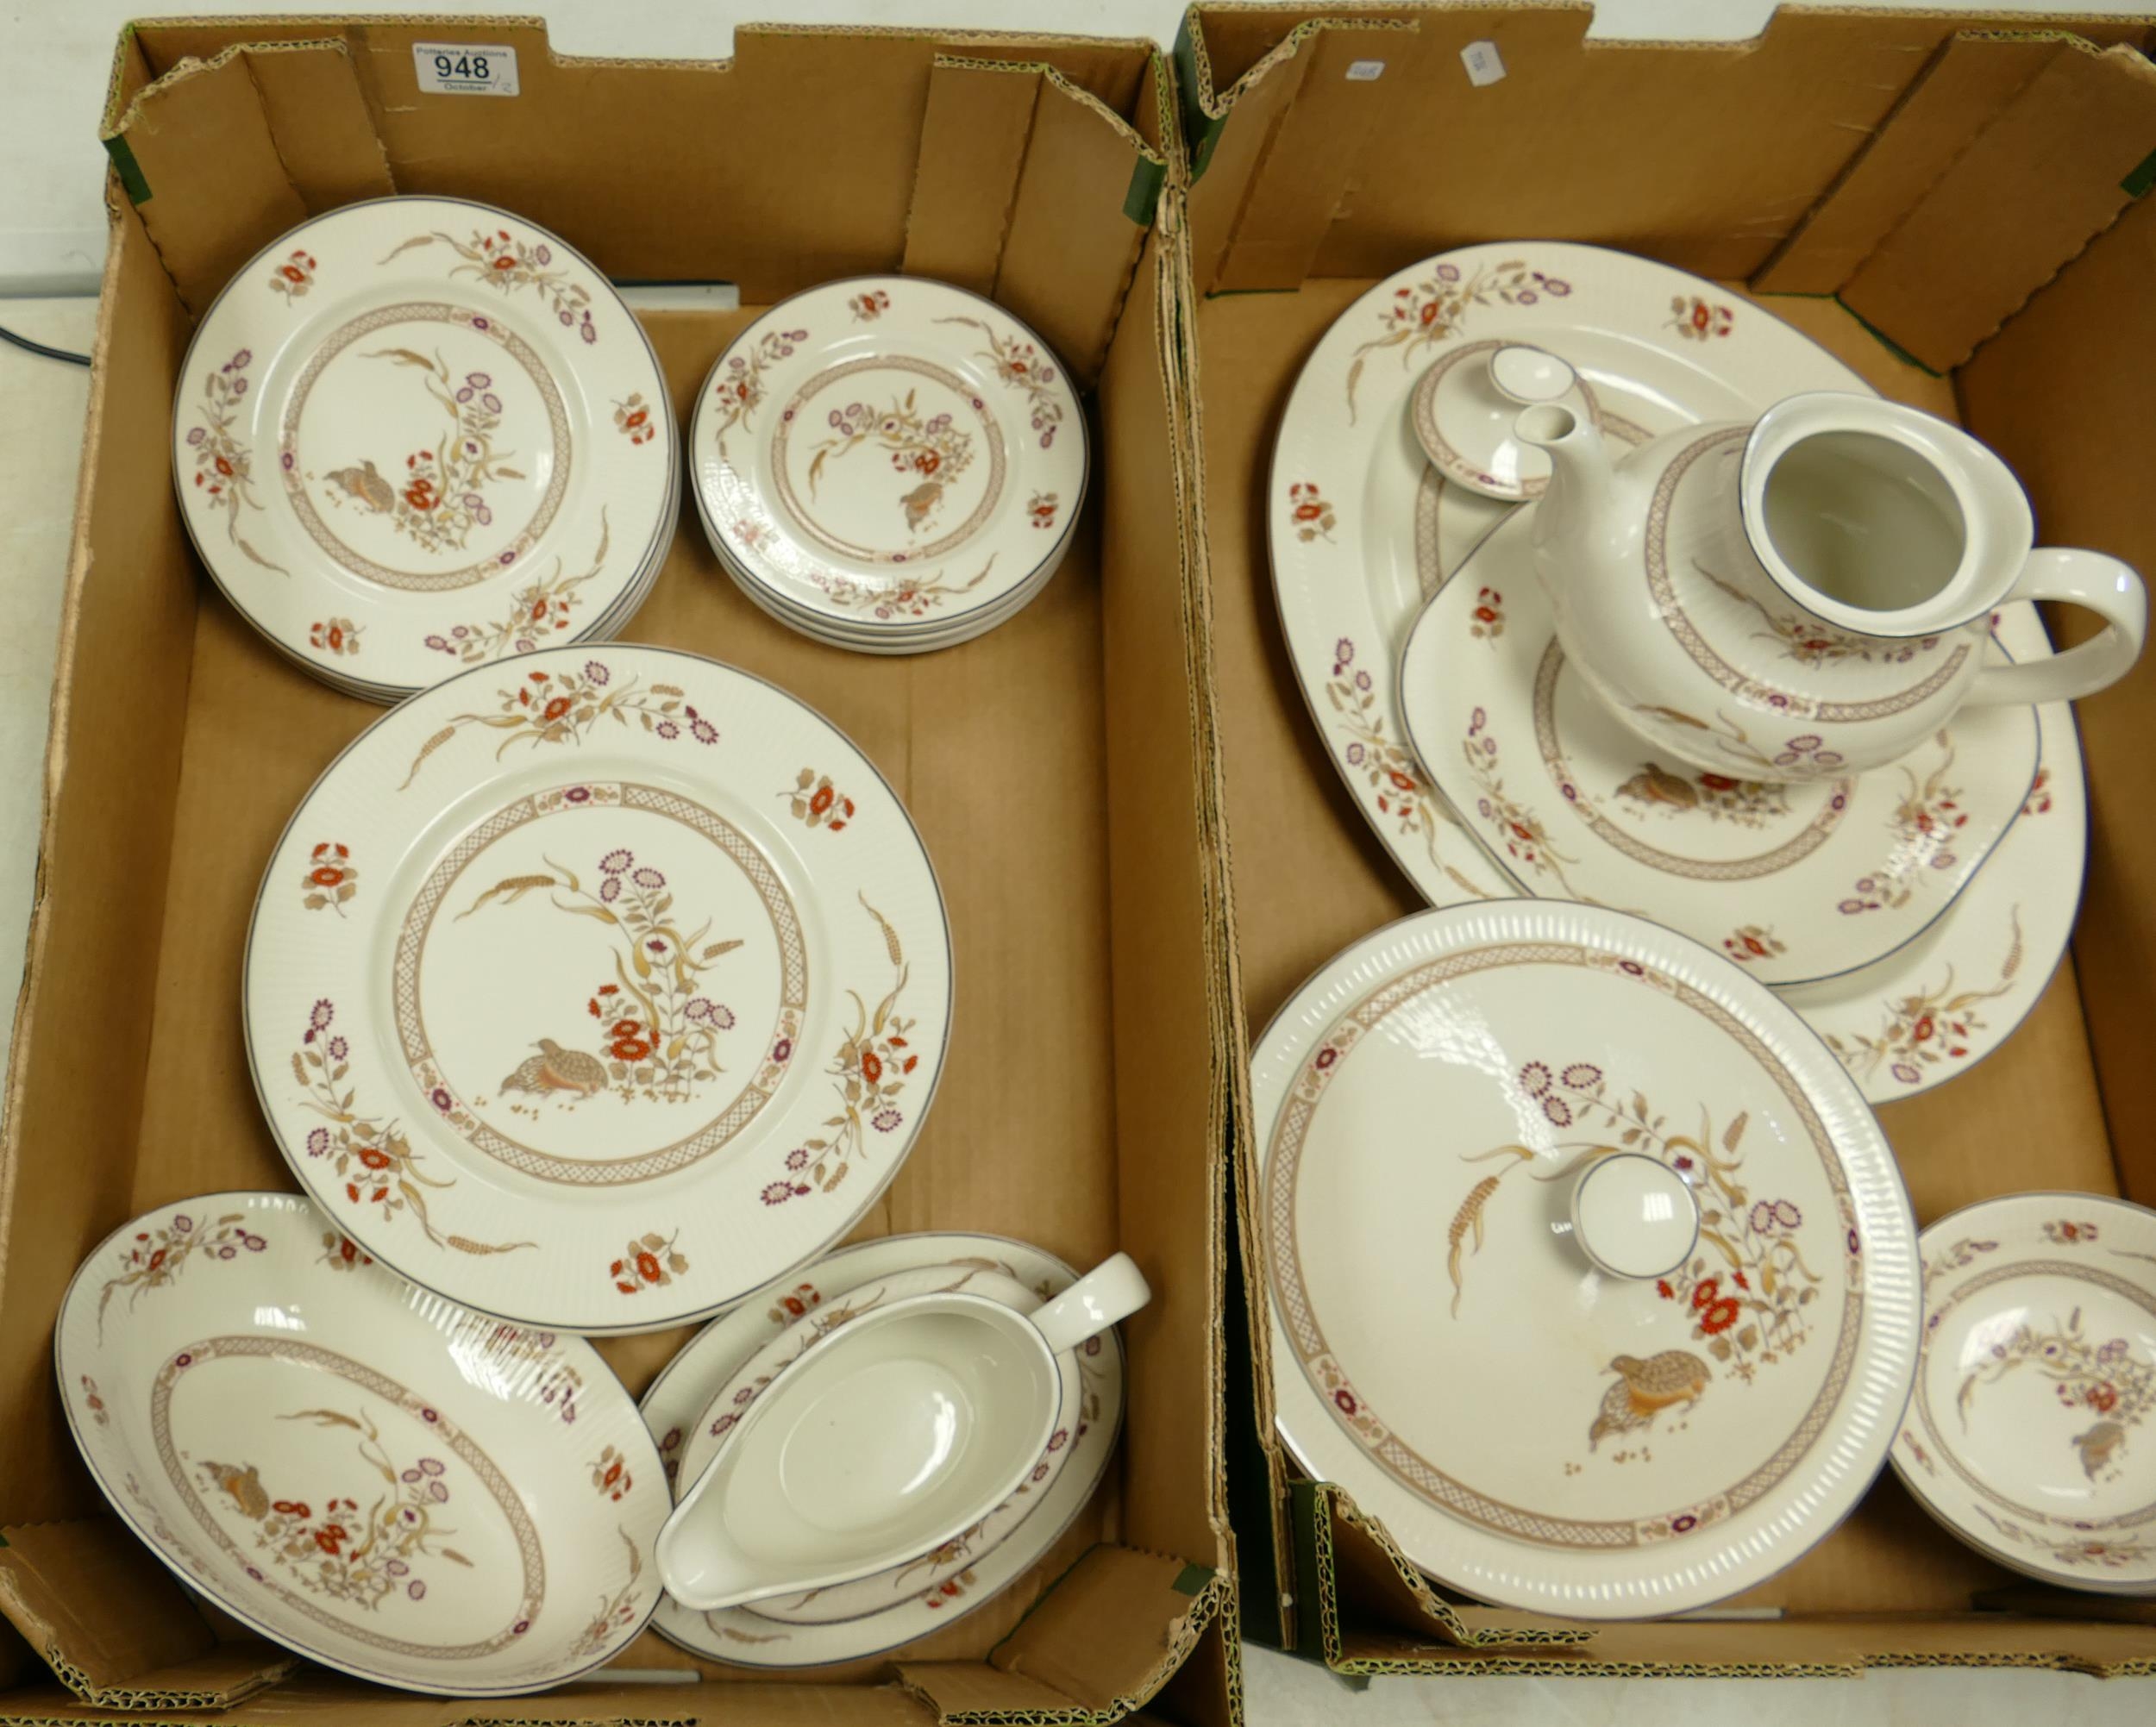 A collection of Royal Doulton Russet Glen patterned Tea & dinnerware to include plates, cake serving